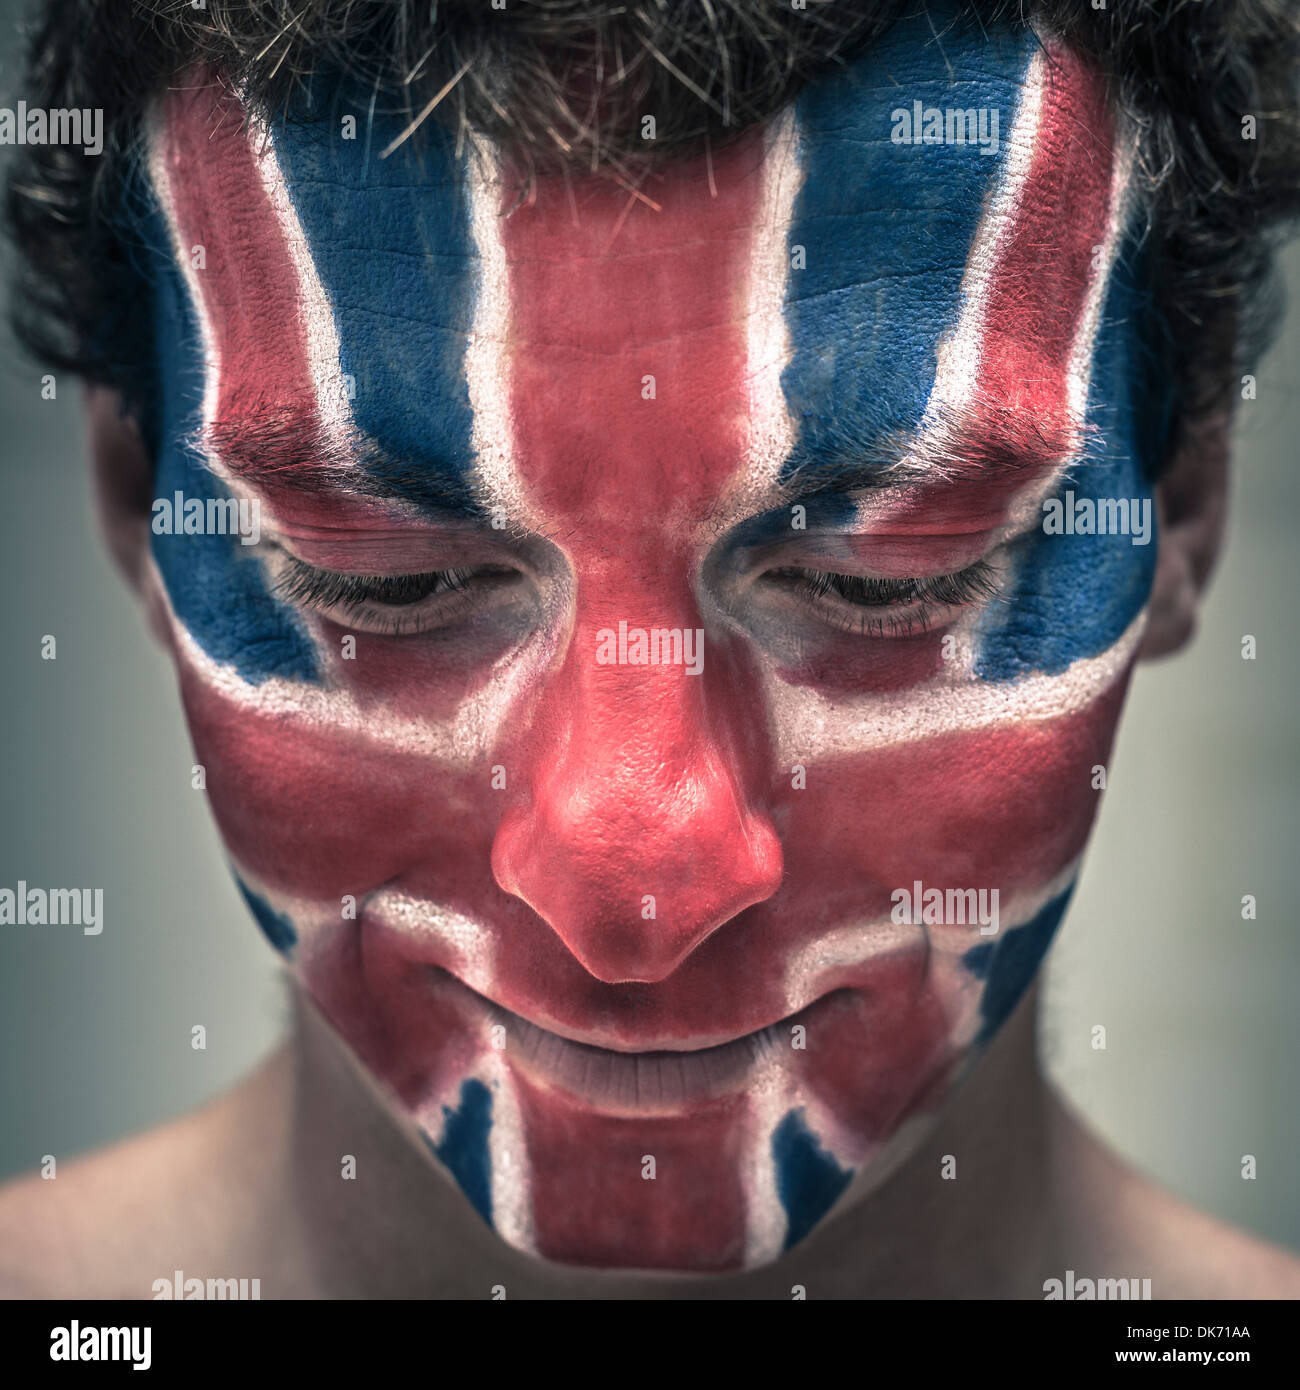 Closeup of smiling man with British flag painted on face looking down. Stock Photo